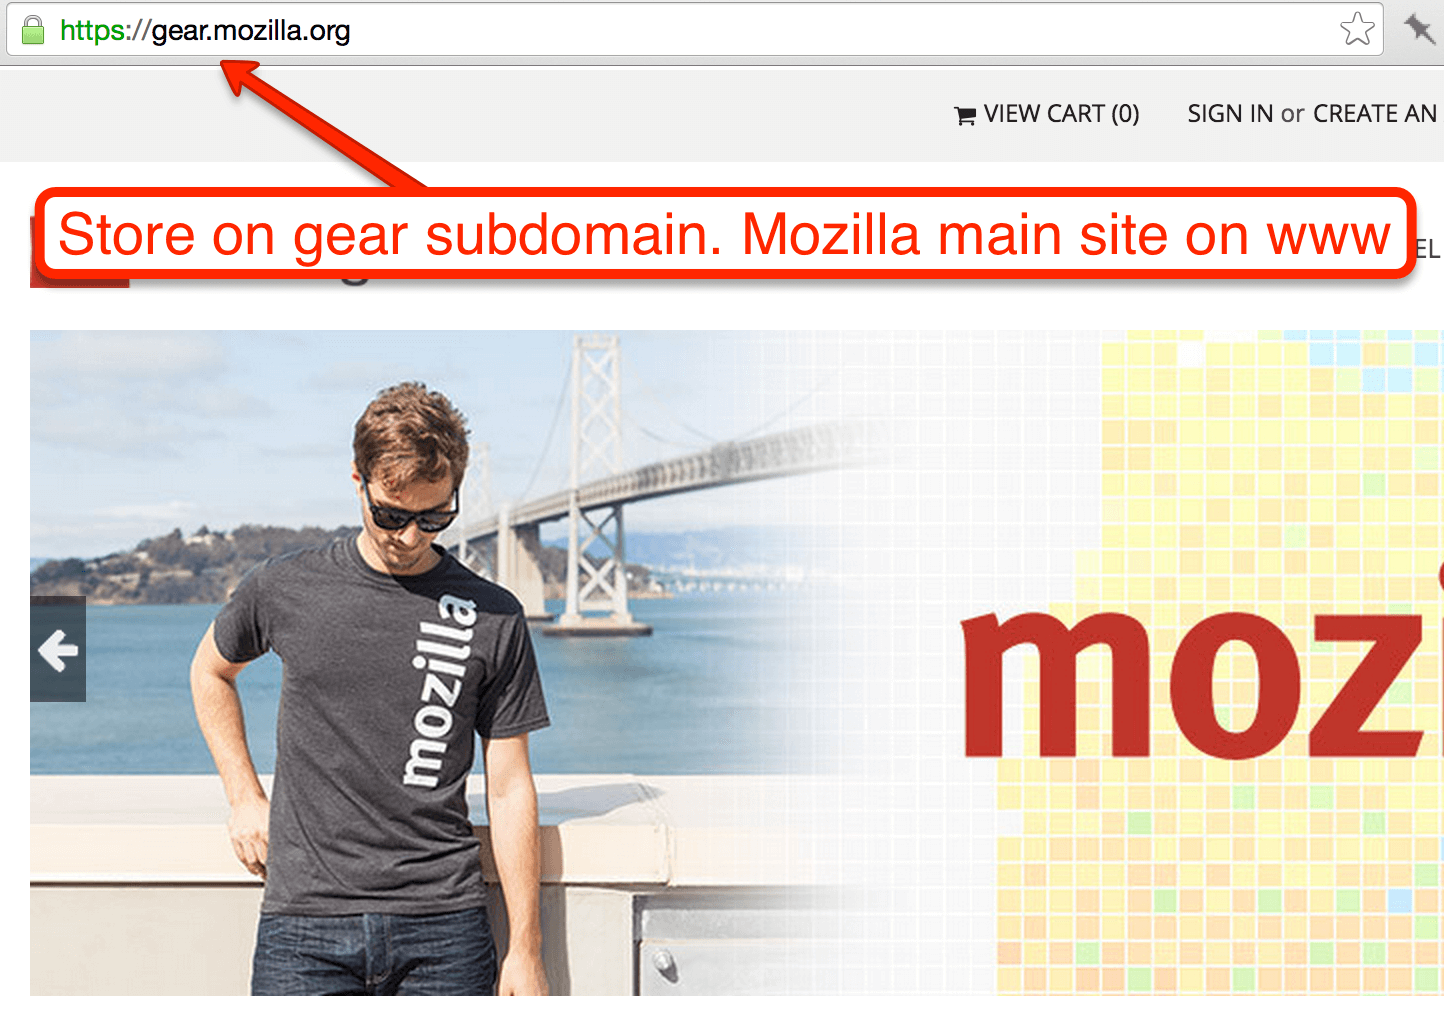 Mozilla uses the gear.mozilla.org for their Shopify Plus powered store